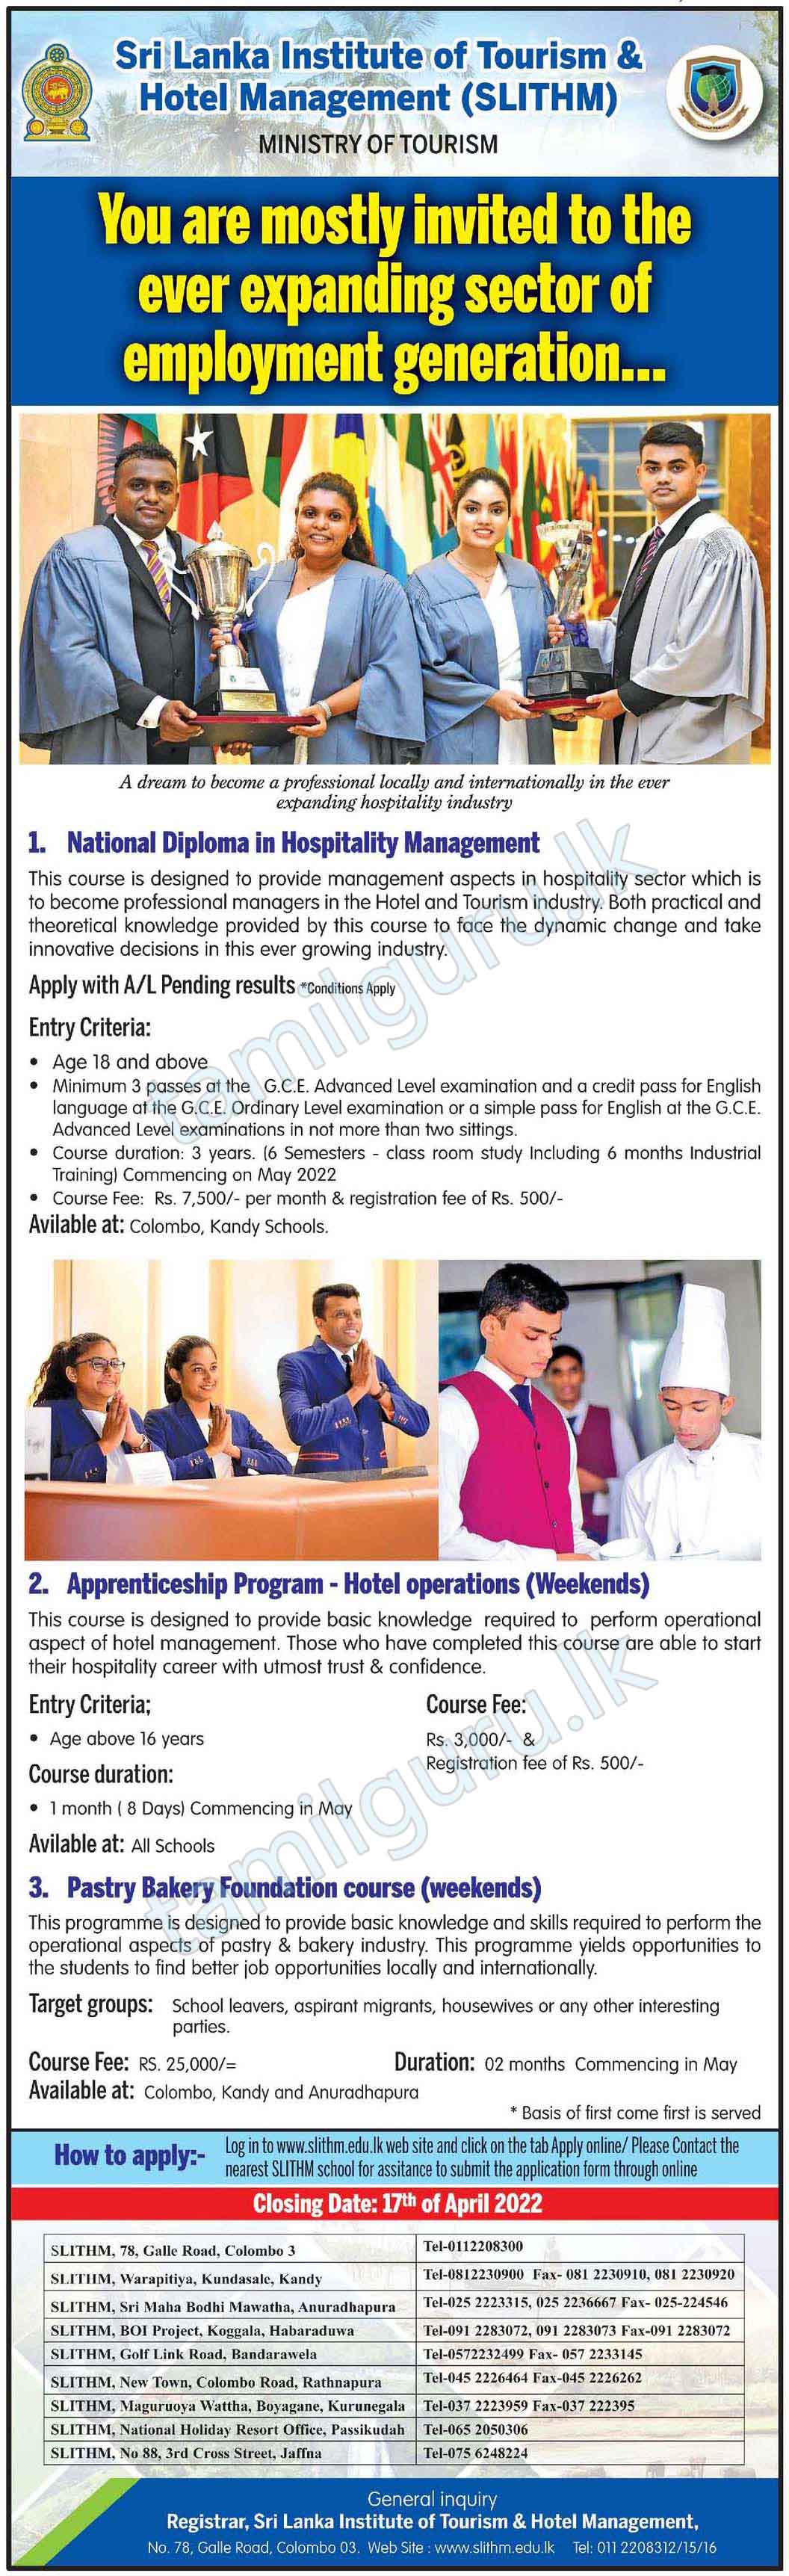 Calling Applications for Courses Conducted by Sri Lanka Institute of Tourism & Hotel Management (SLITHM) - 2022